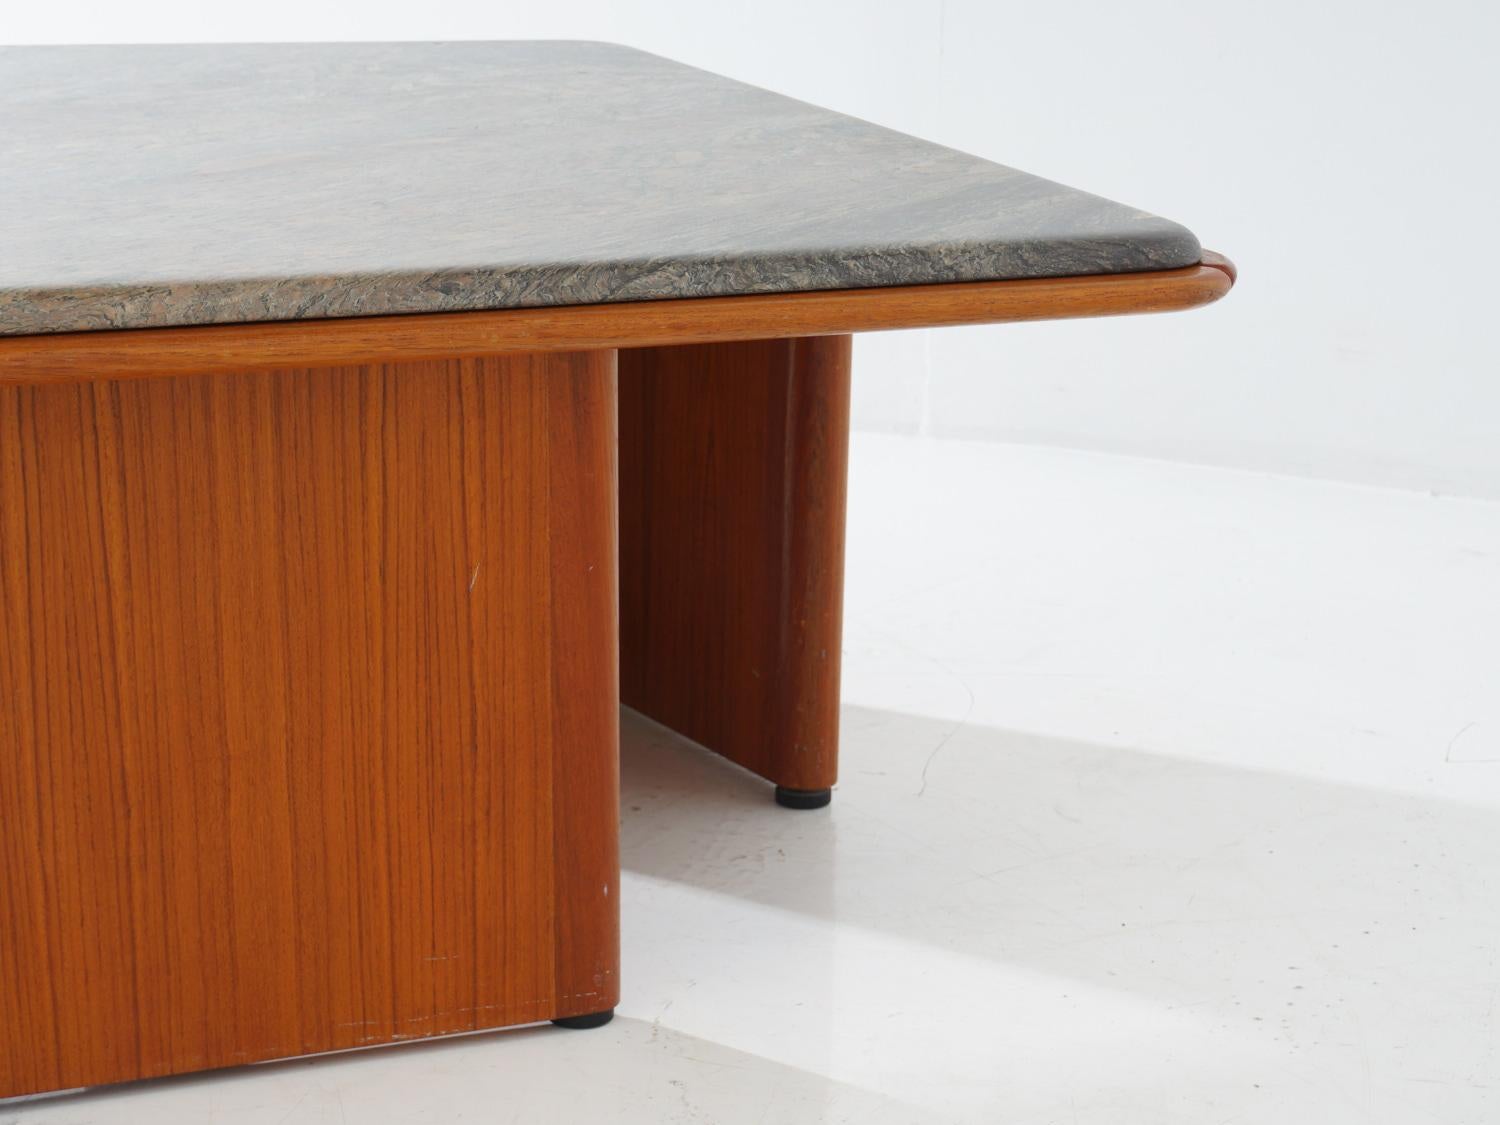 Marble & Teak Coffee Table, 1960s For Sale 5